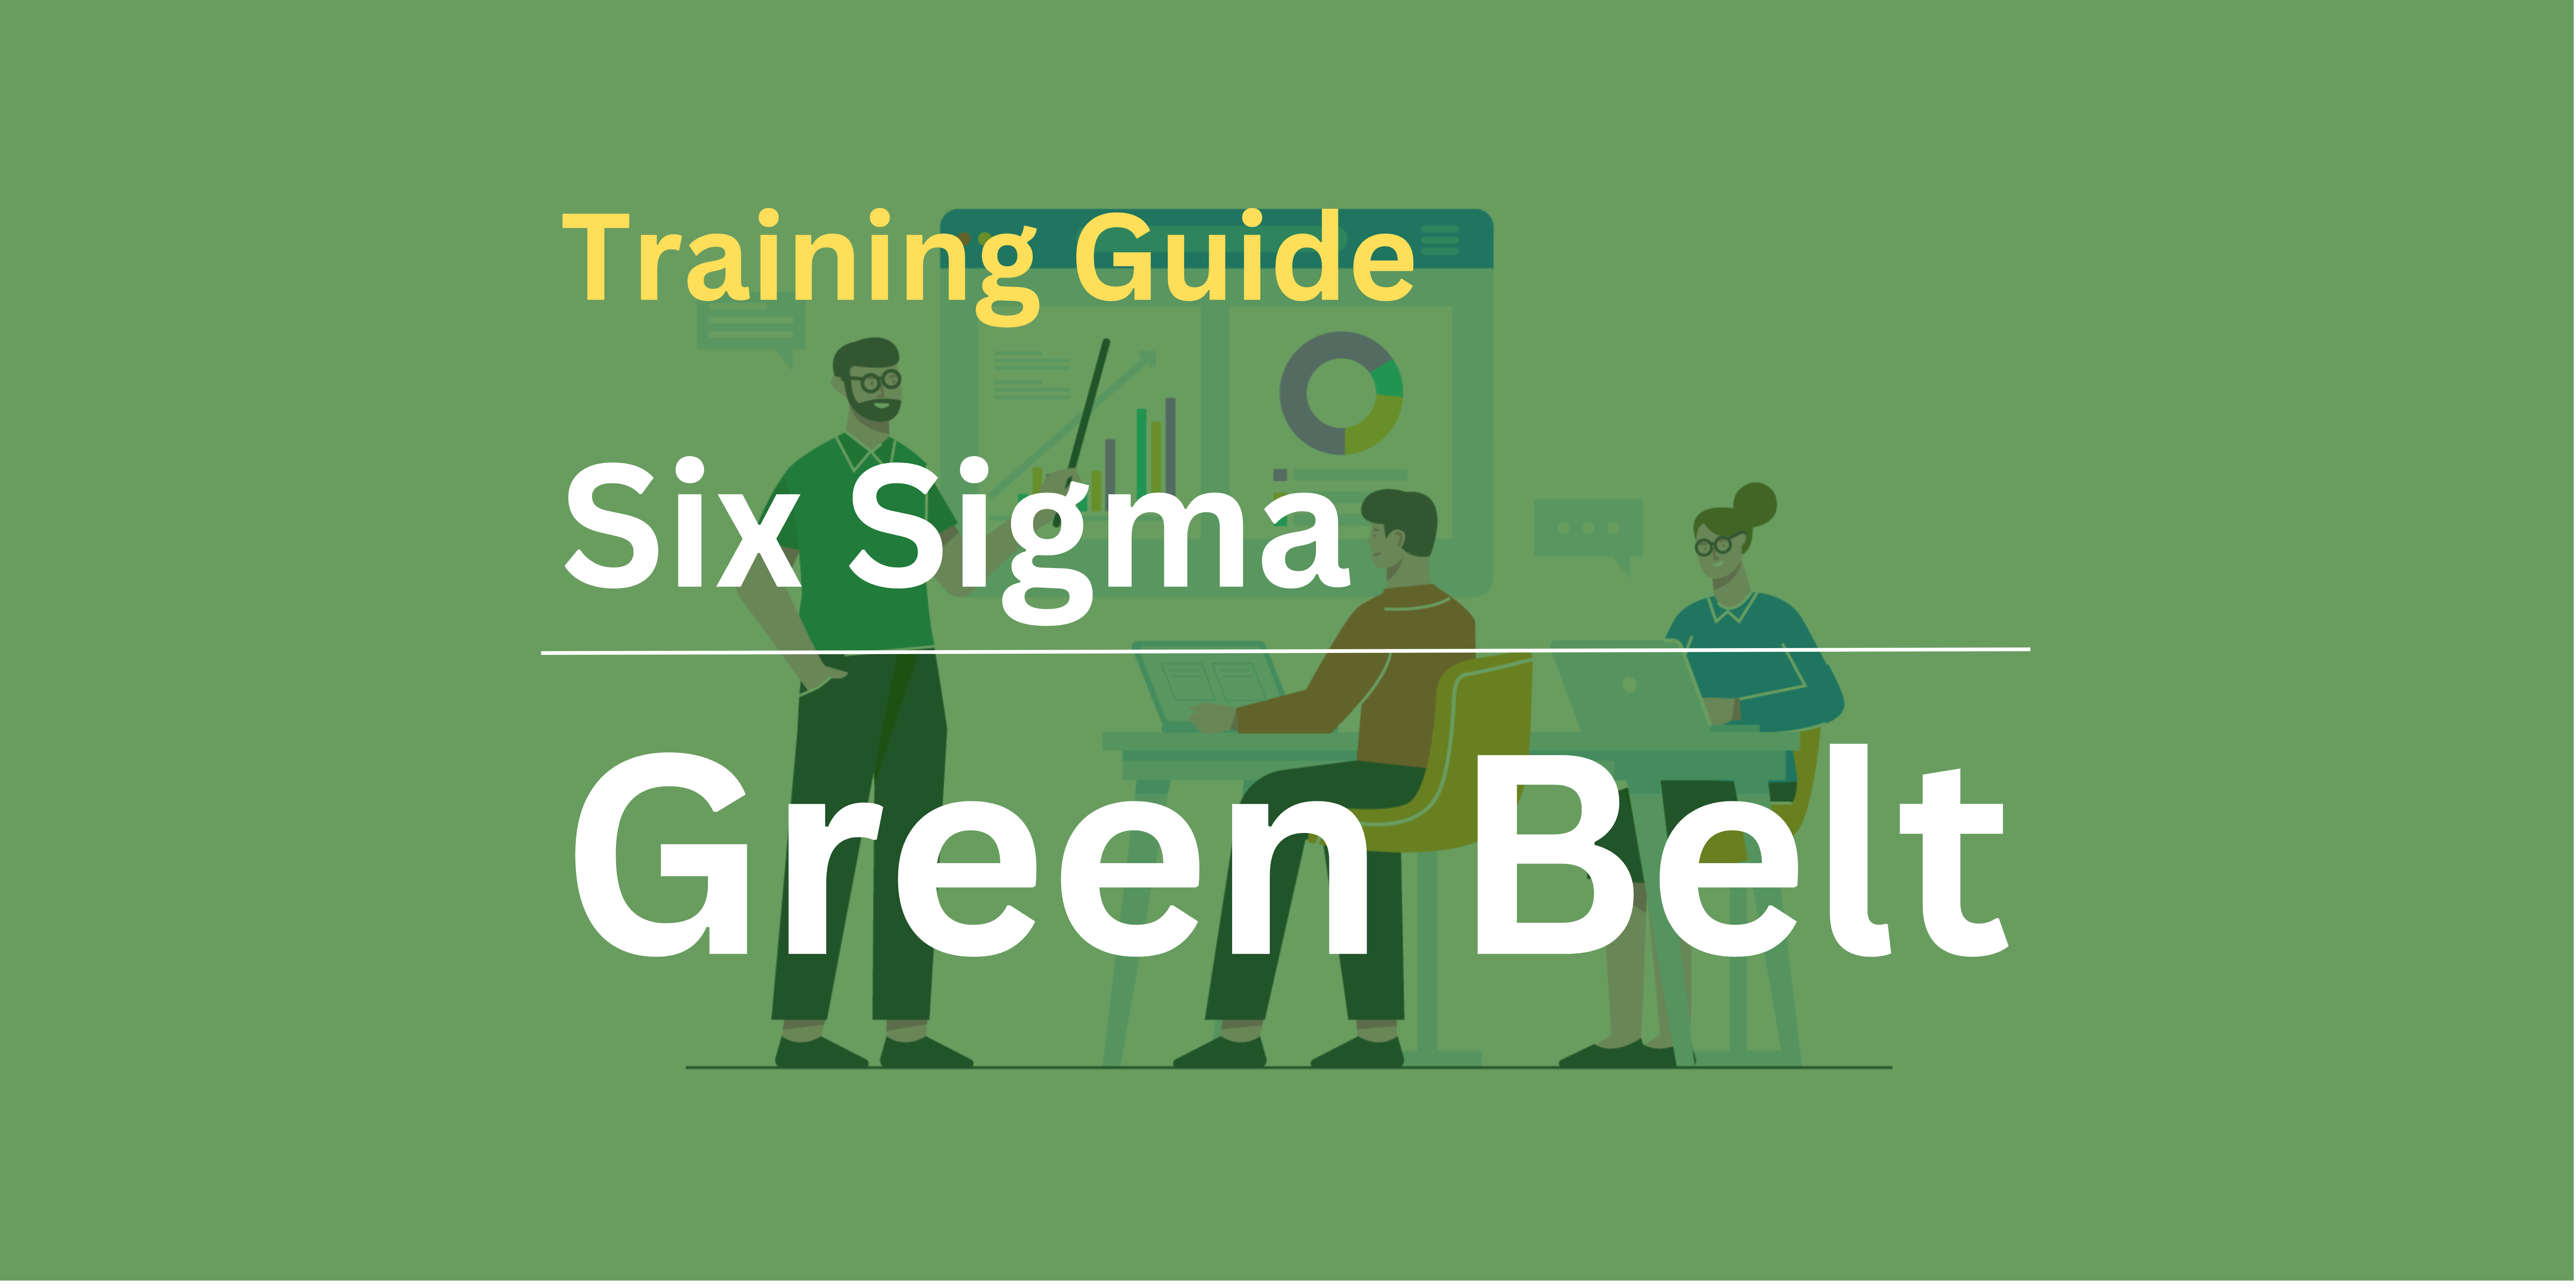 Six Sigma Green Belt Certification Training Guide for Professional Growth